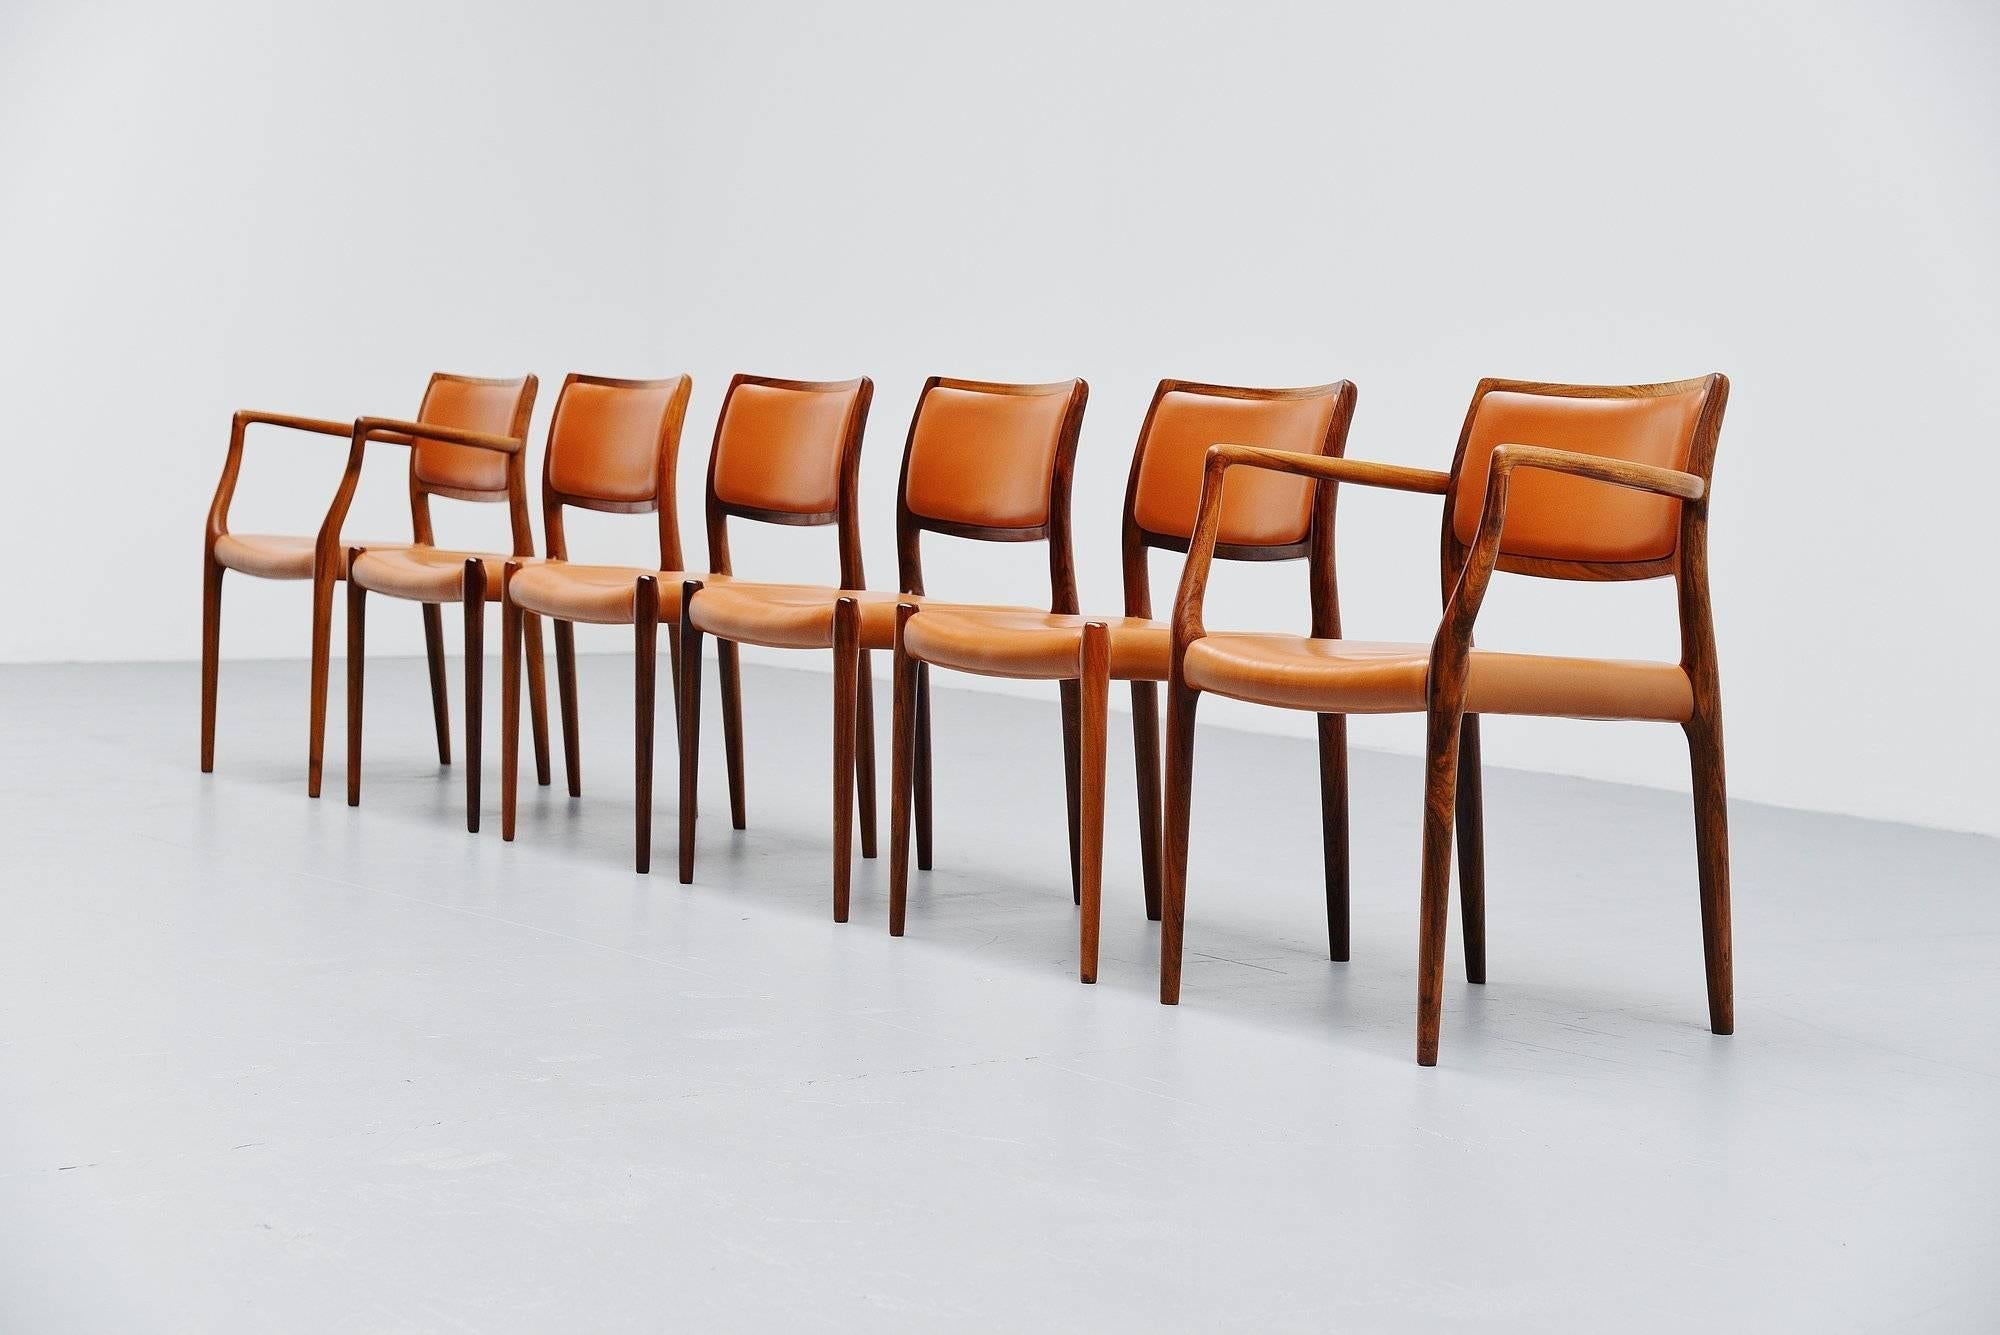 Very nice set of six rosewood chairs model 80 and model 65, designed by Niels Møller and manufactured by J.L. Møller Mobelfabrik, Denmark, 1966. The chairs have solid rosewood frames and original cognac leather upholstery with a very nice patina